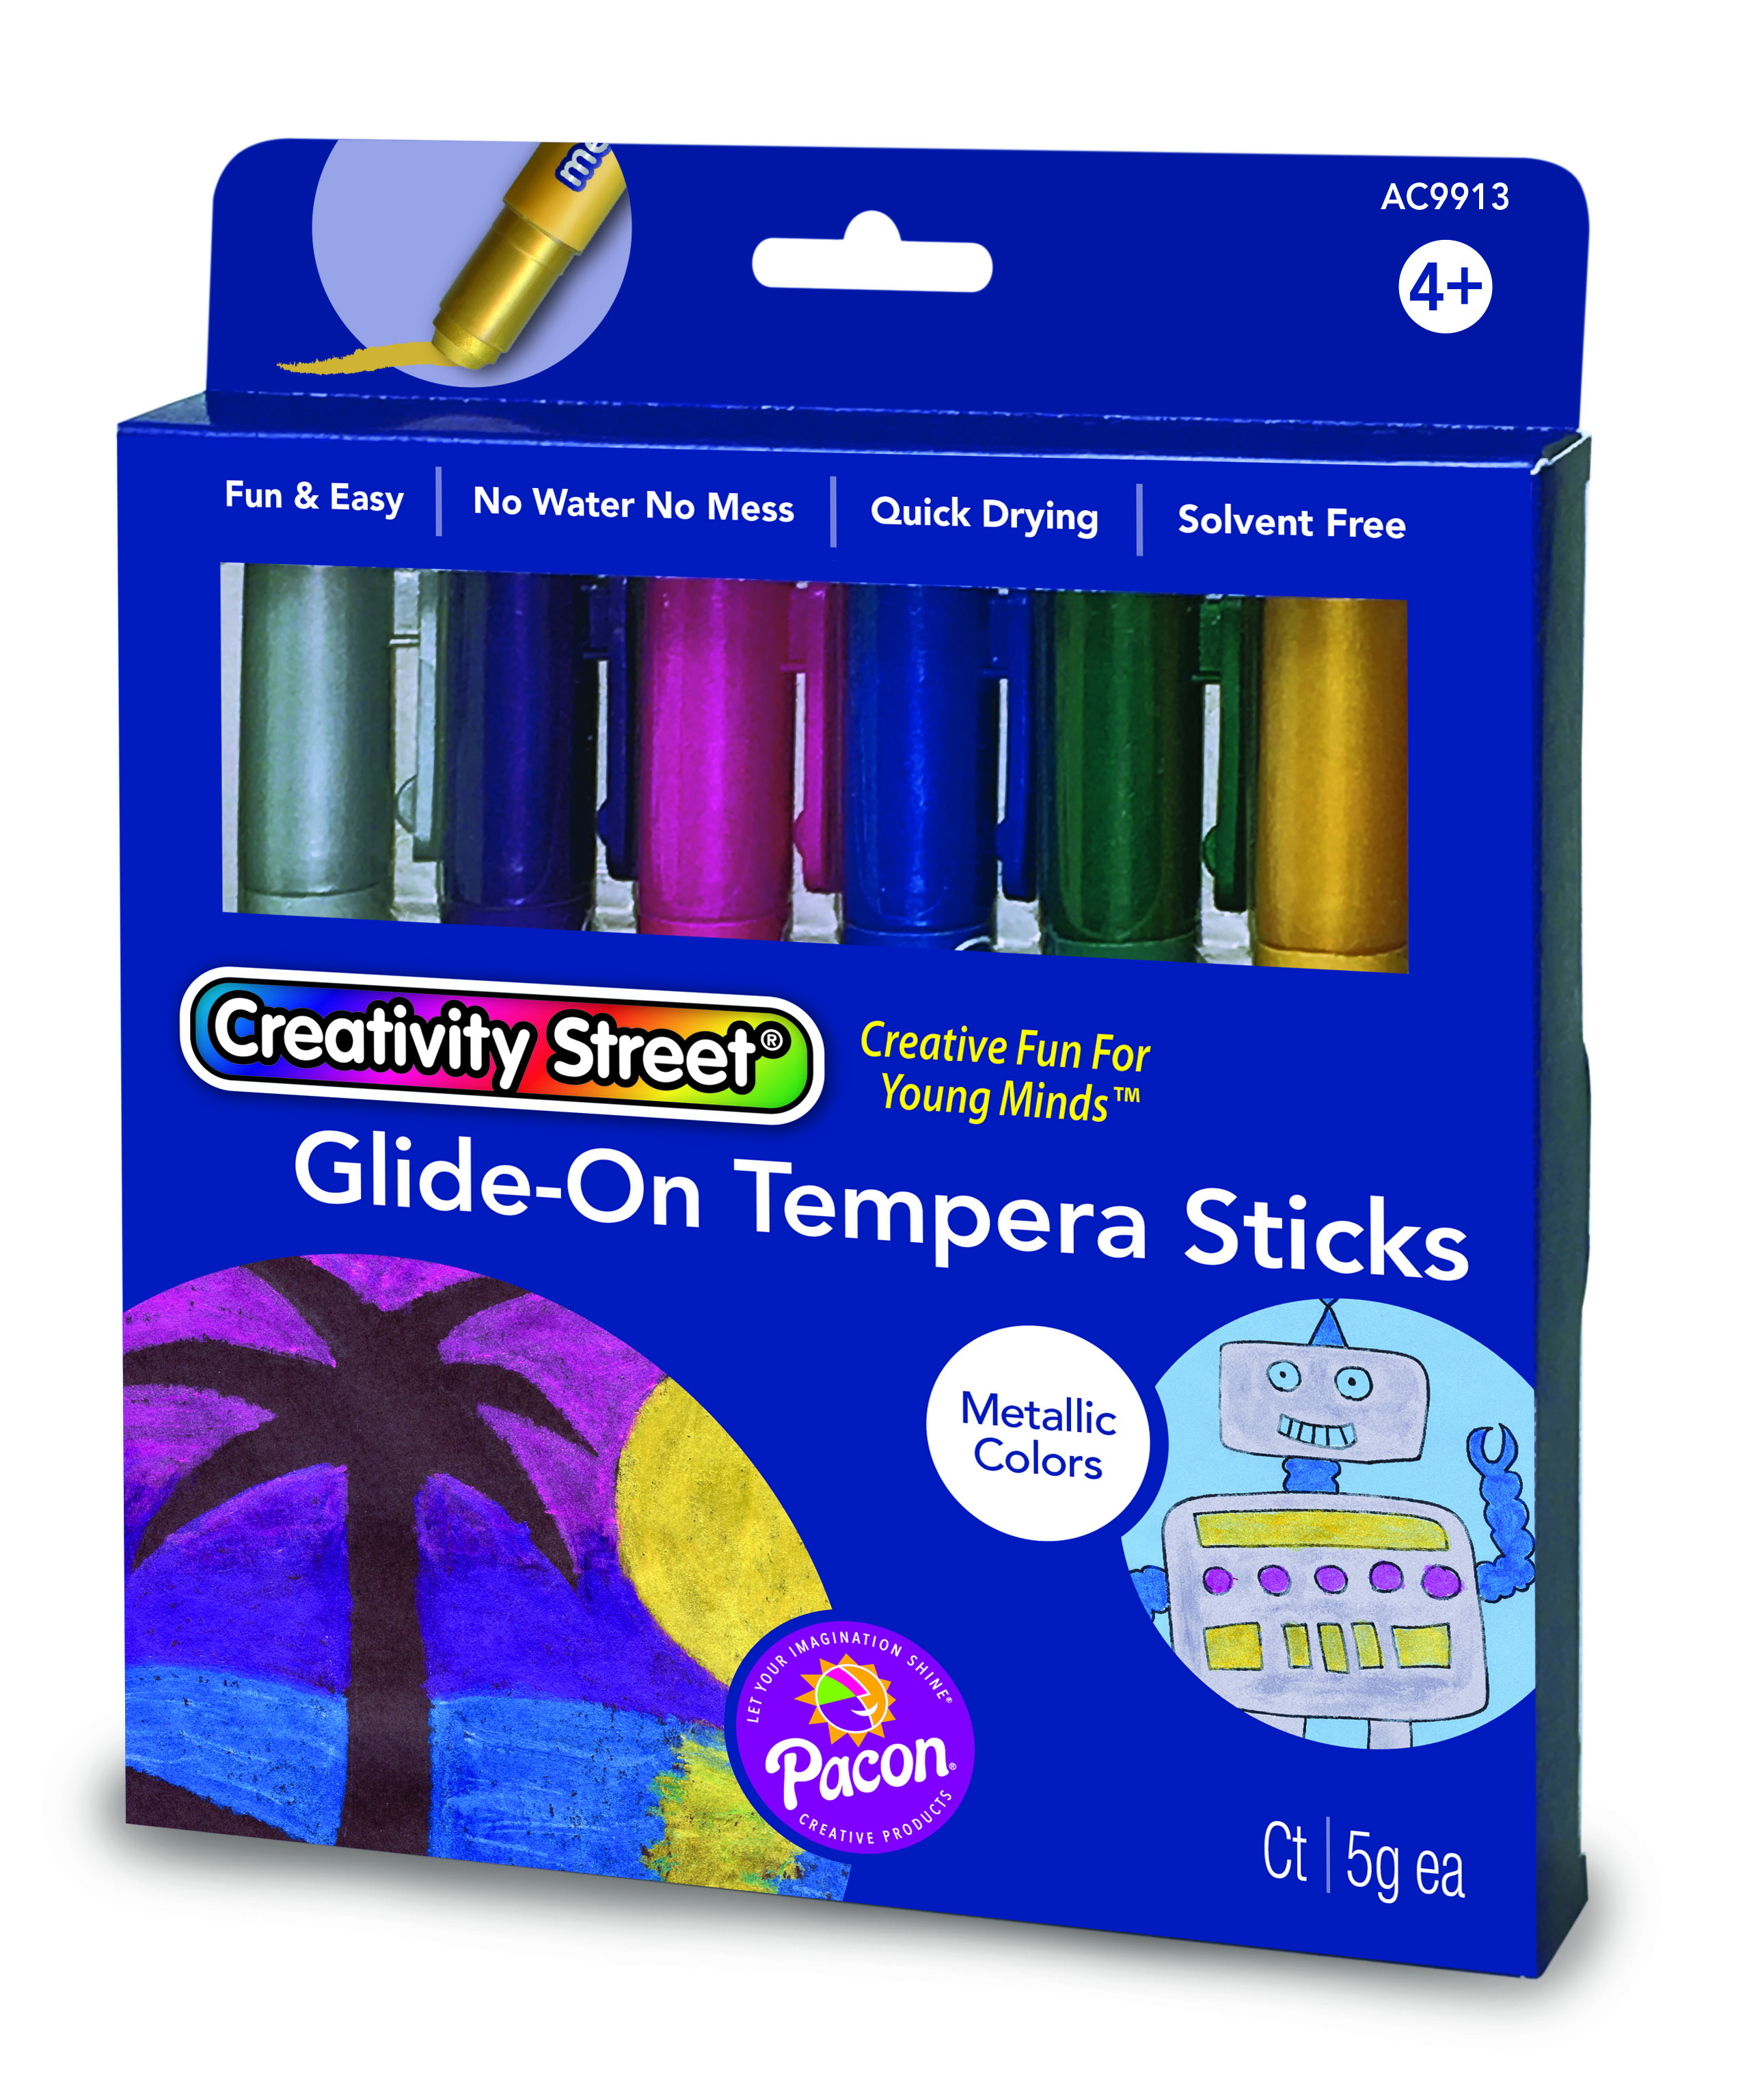 Creativity Street® Glide-On Tempera Sticks, Metallic Colors, 6 Count by Pacon Corporation